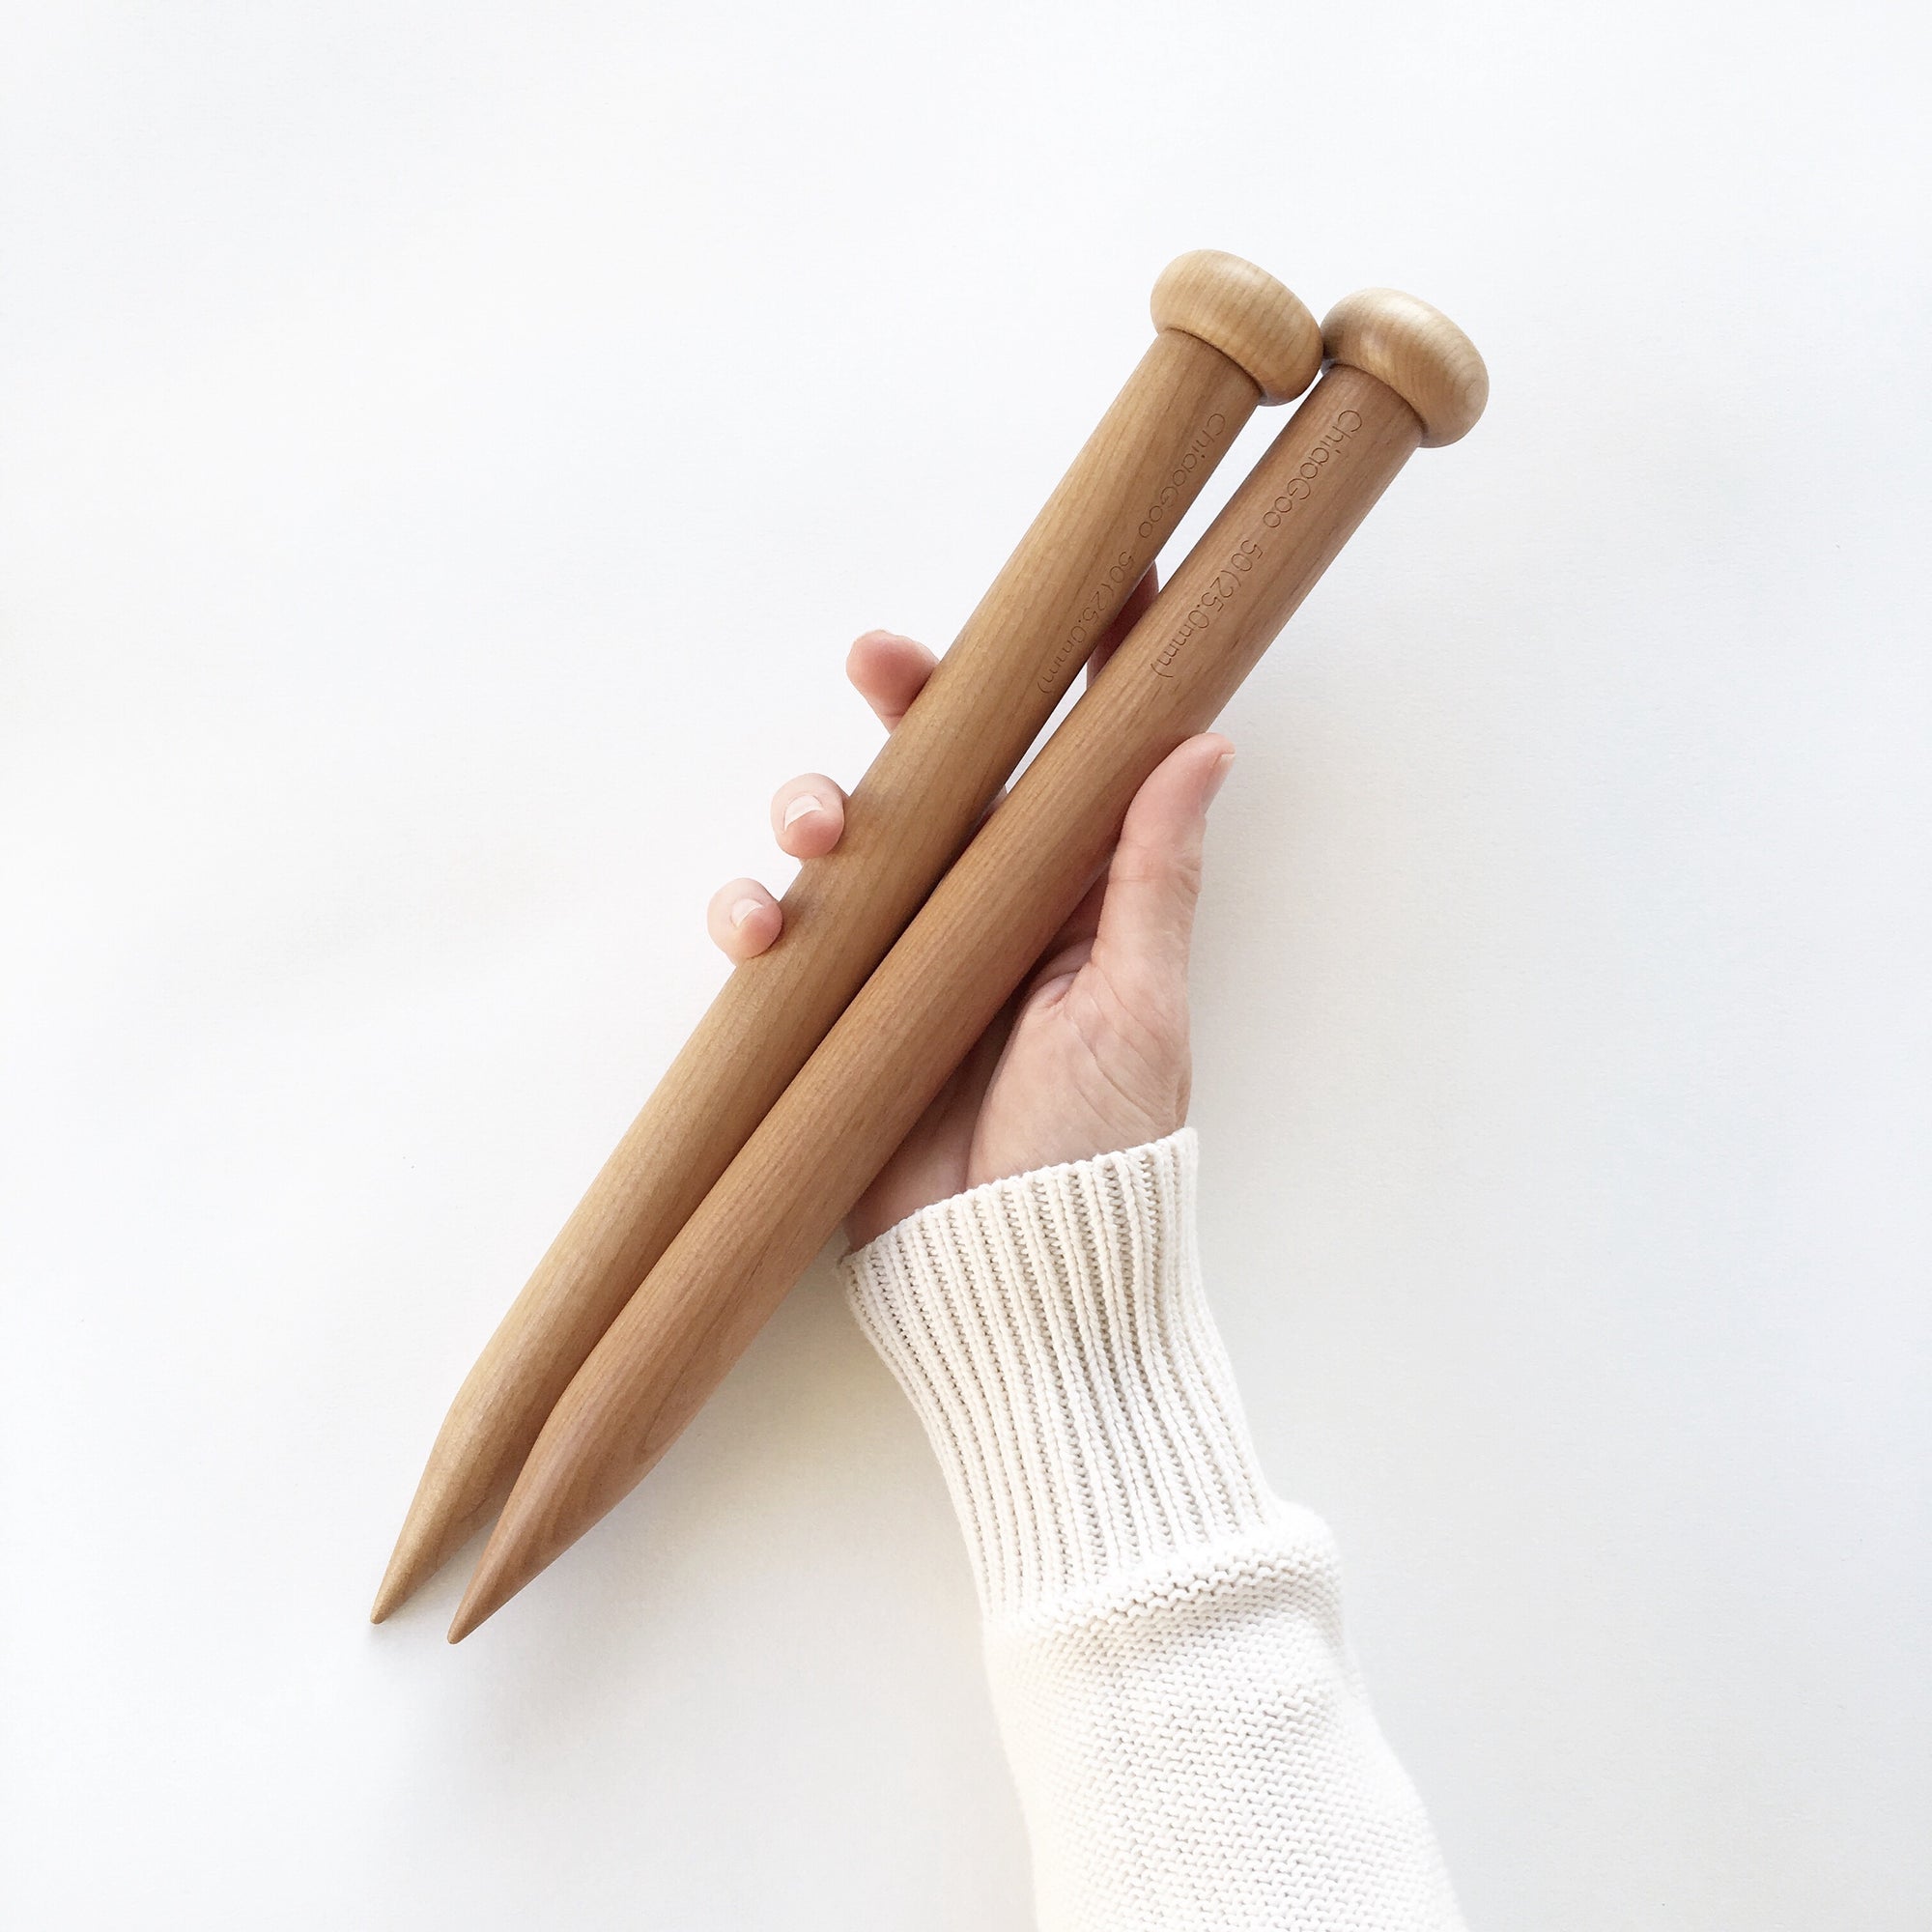 SALE-40% OFF Giant Straight Knitting Needles Size US50 (25 mm) 11 (28 cm)  in length